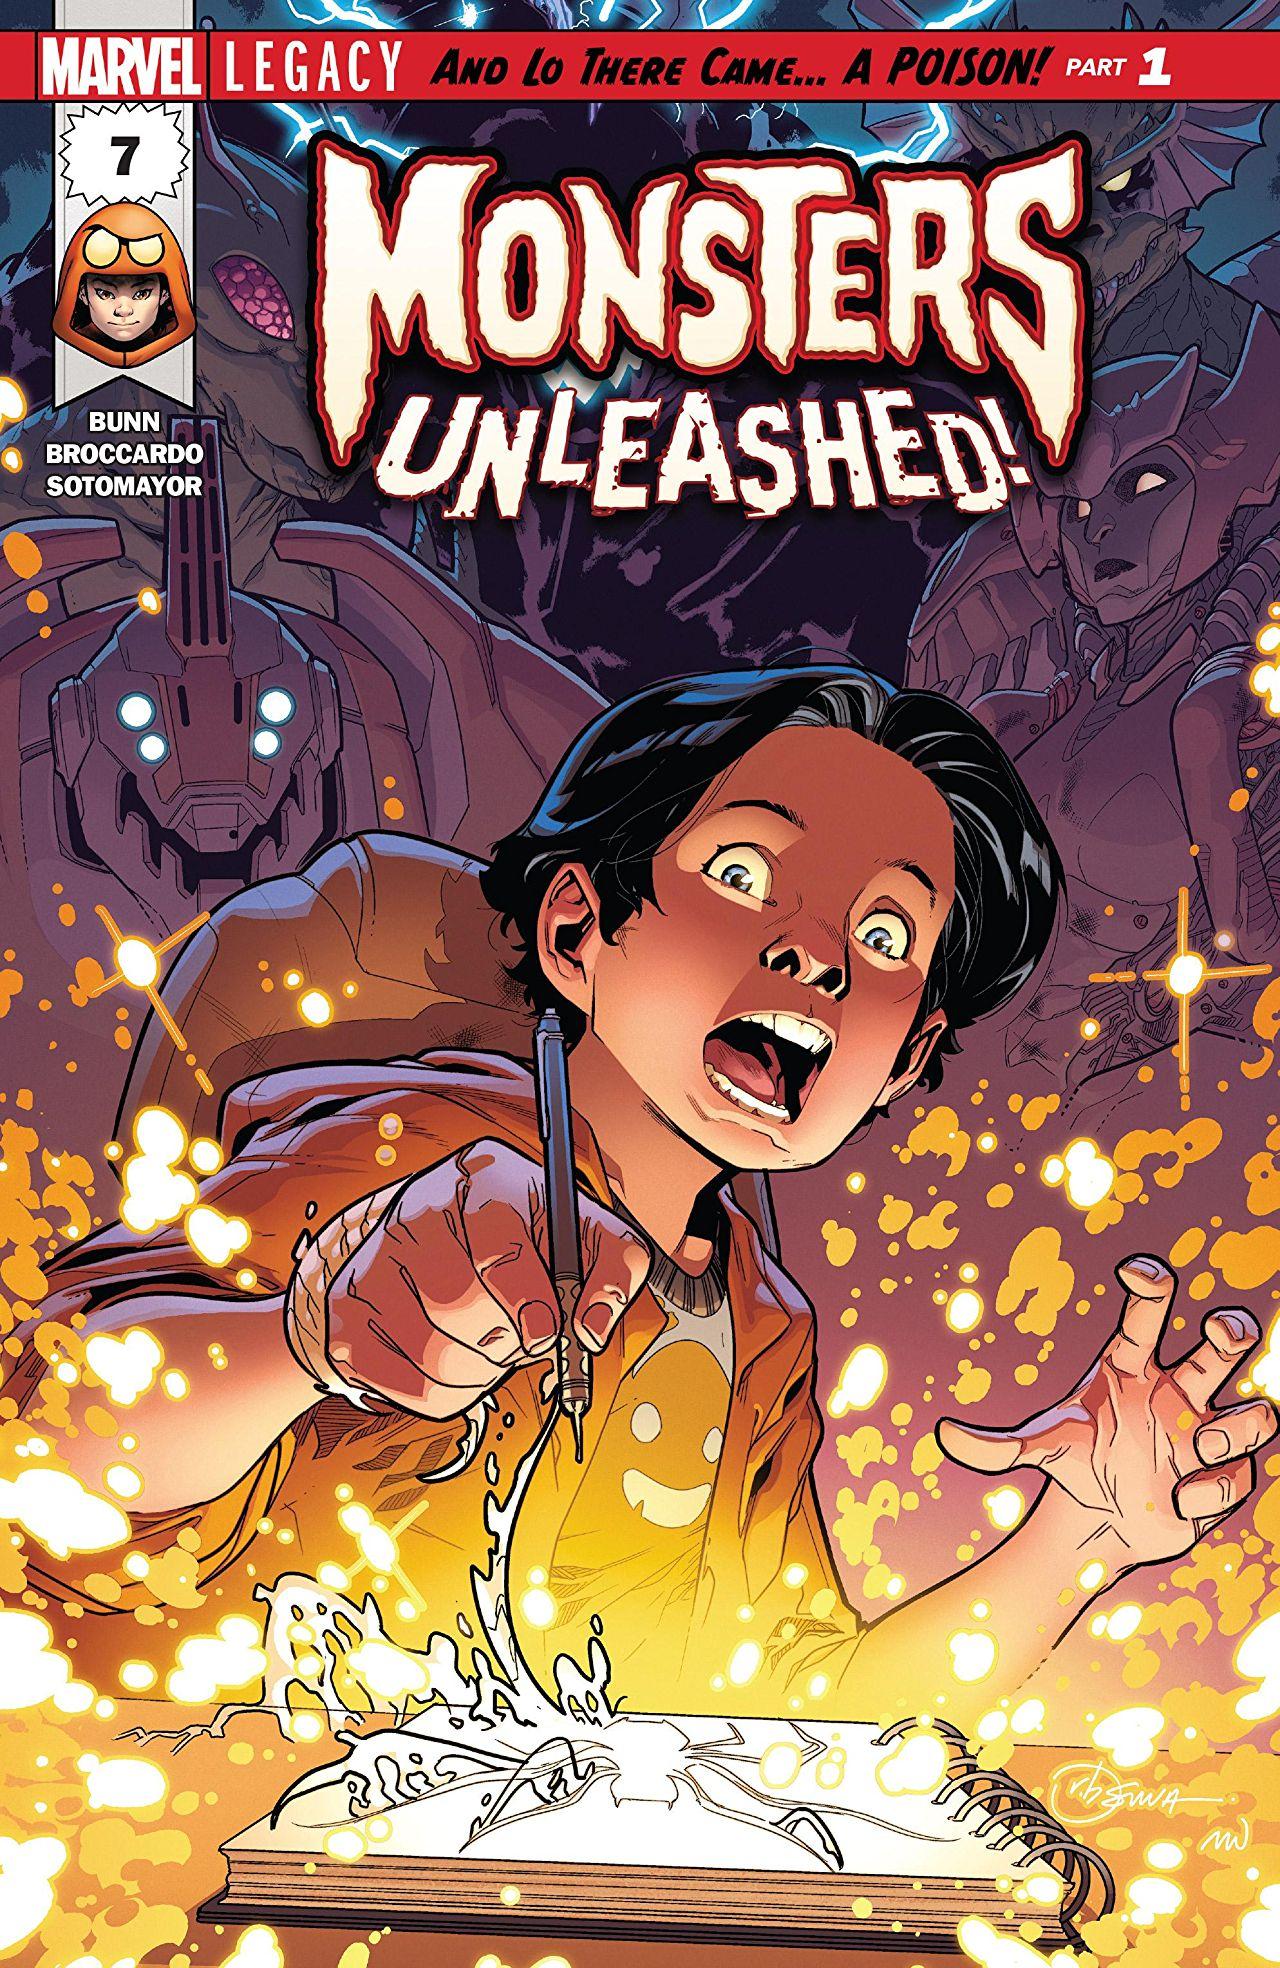 Monsters Unleashed Vol. 3 #7